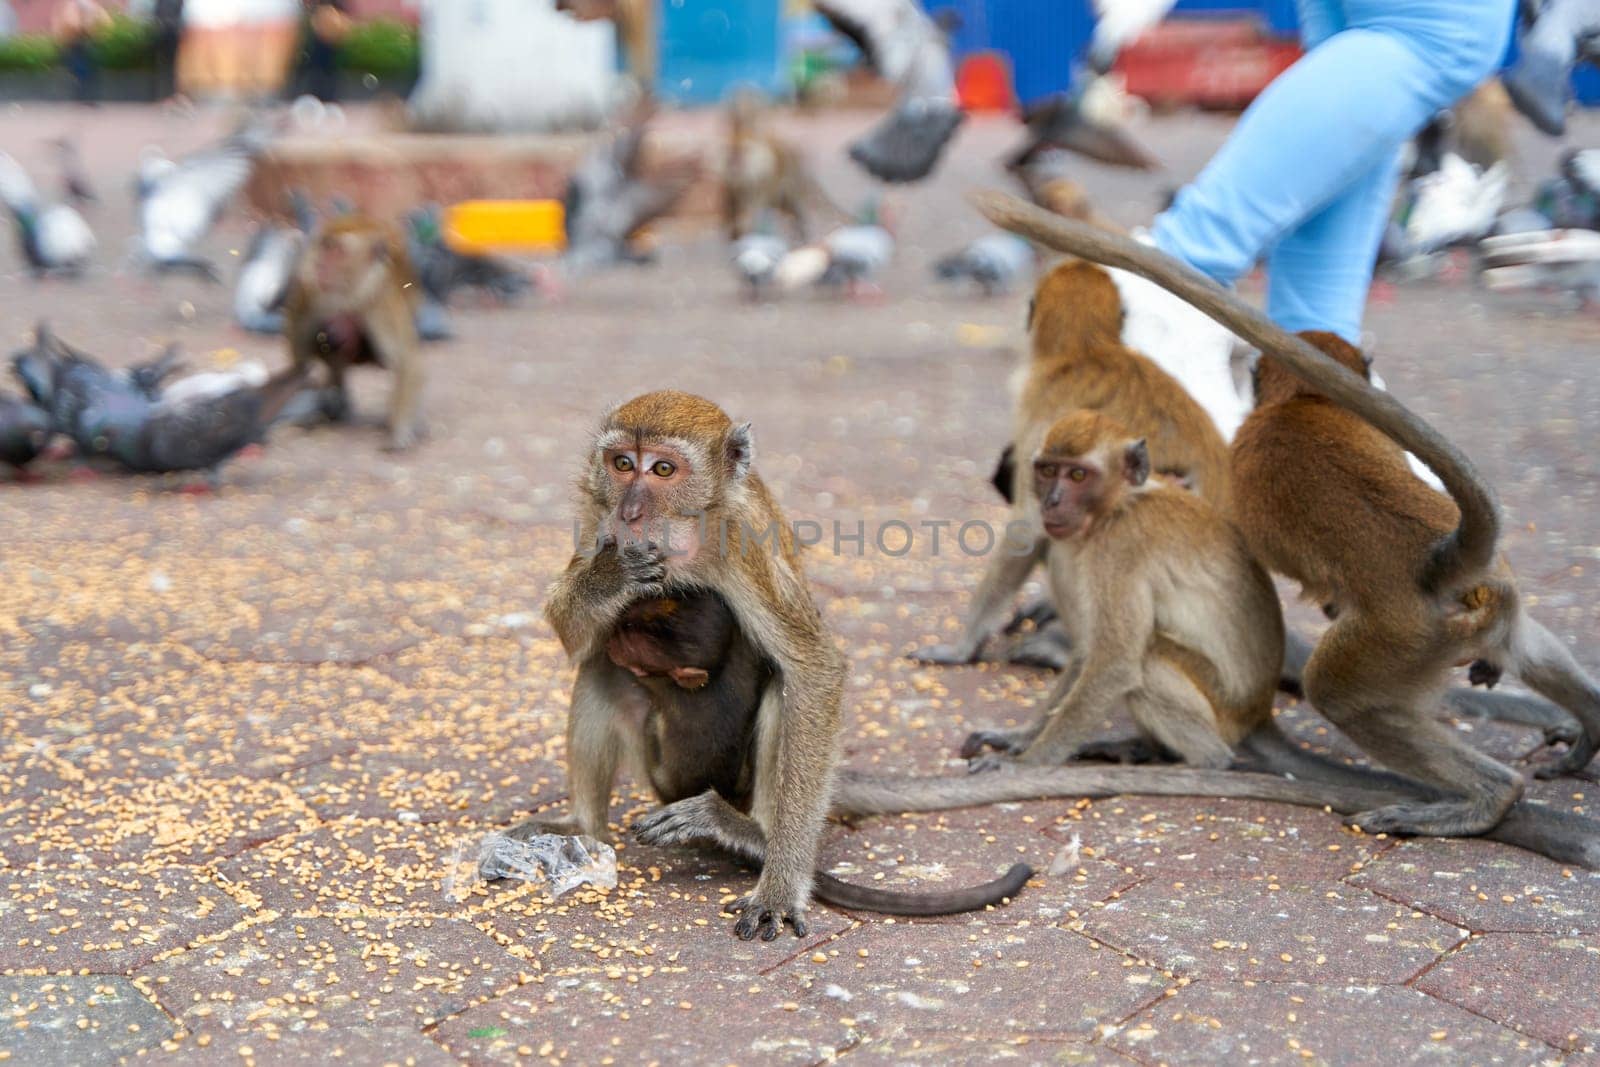 Wild monkeys at the entrance to the Batu Caves take food from the pigeons that visitors feed.